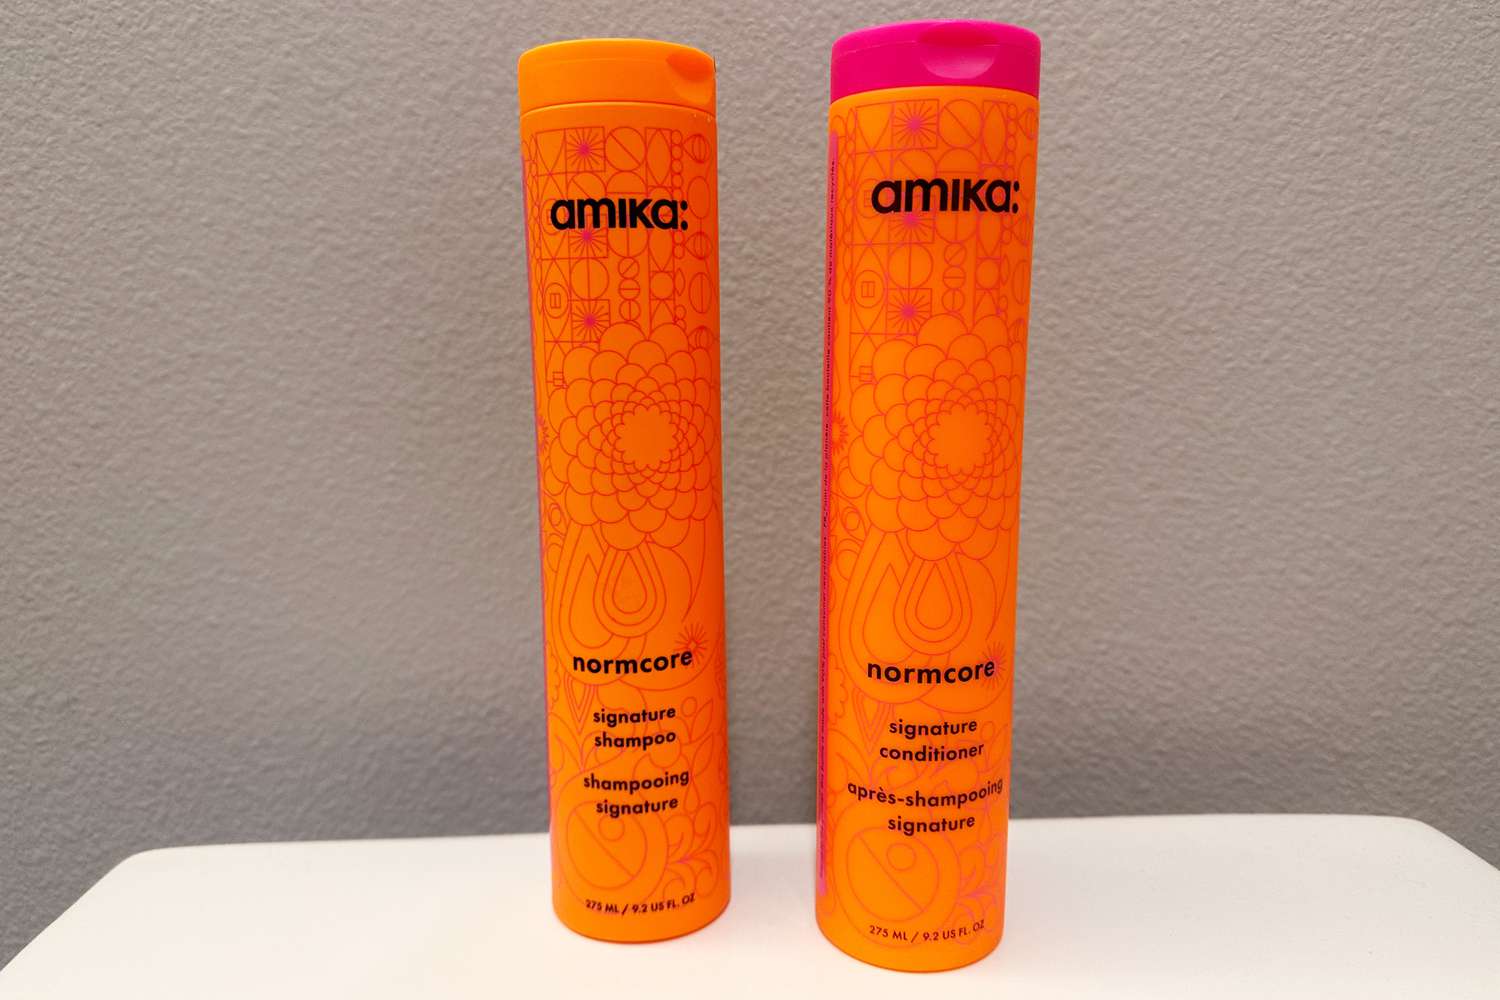 Two bottles of amika Normcore Hydrating Shampoo and Conditioner